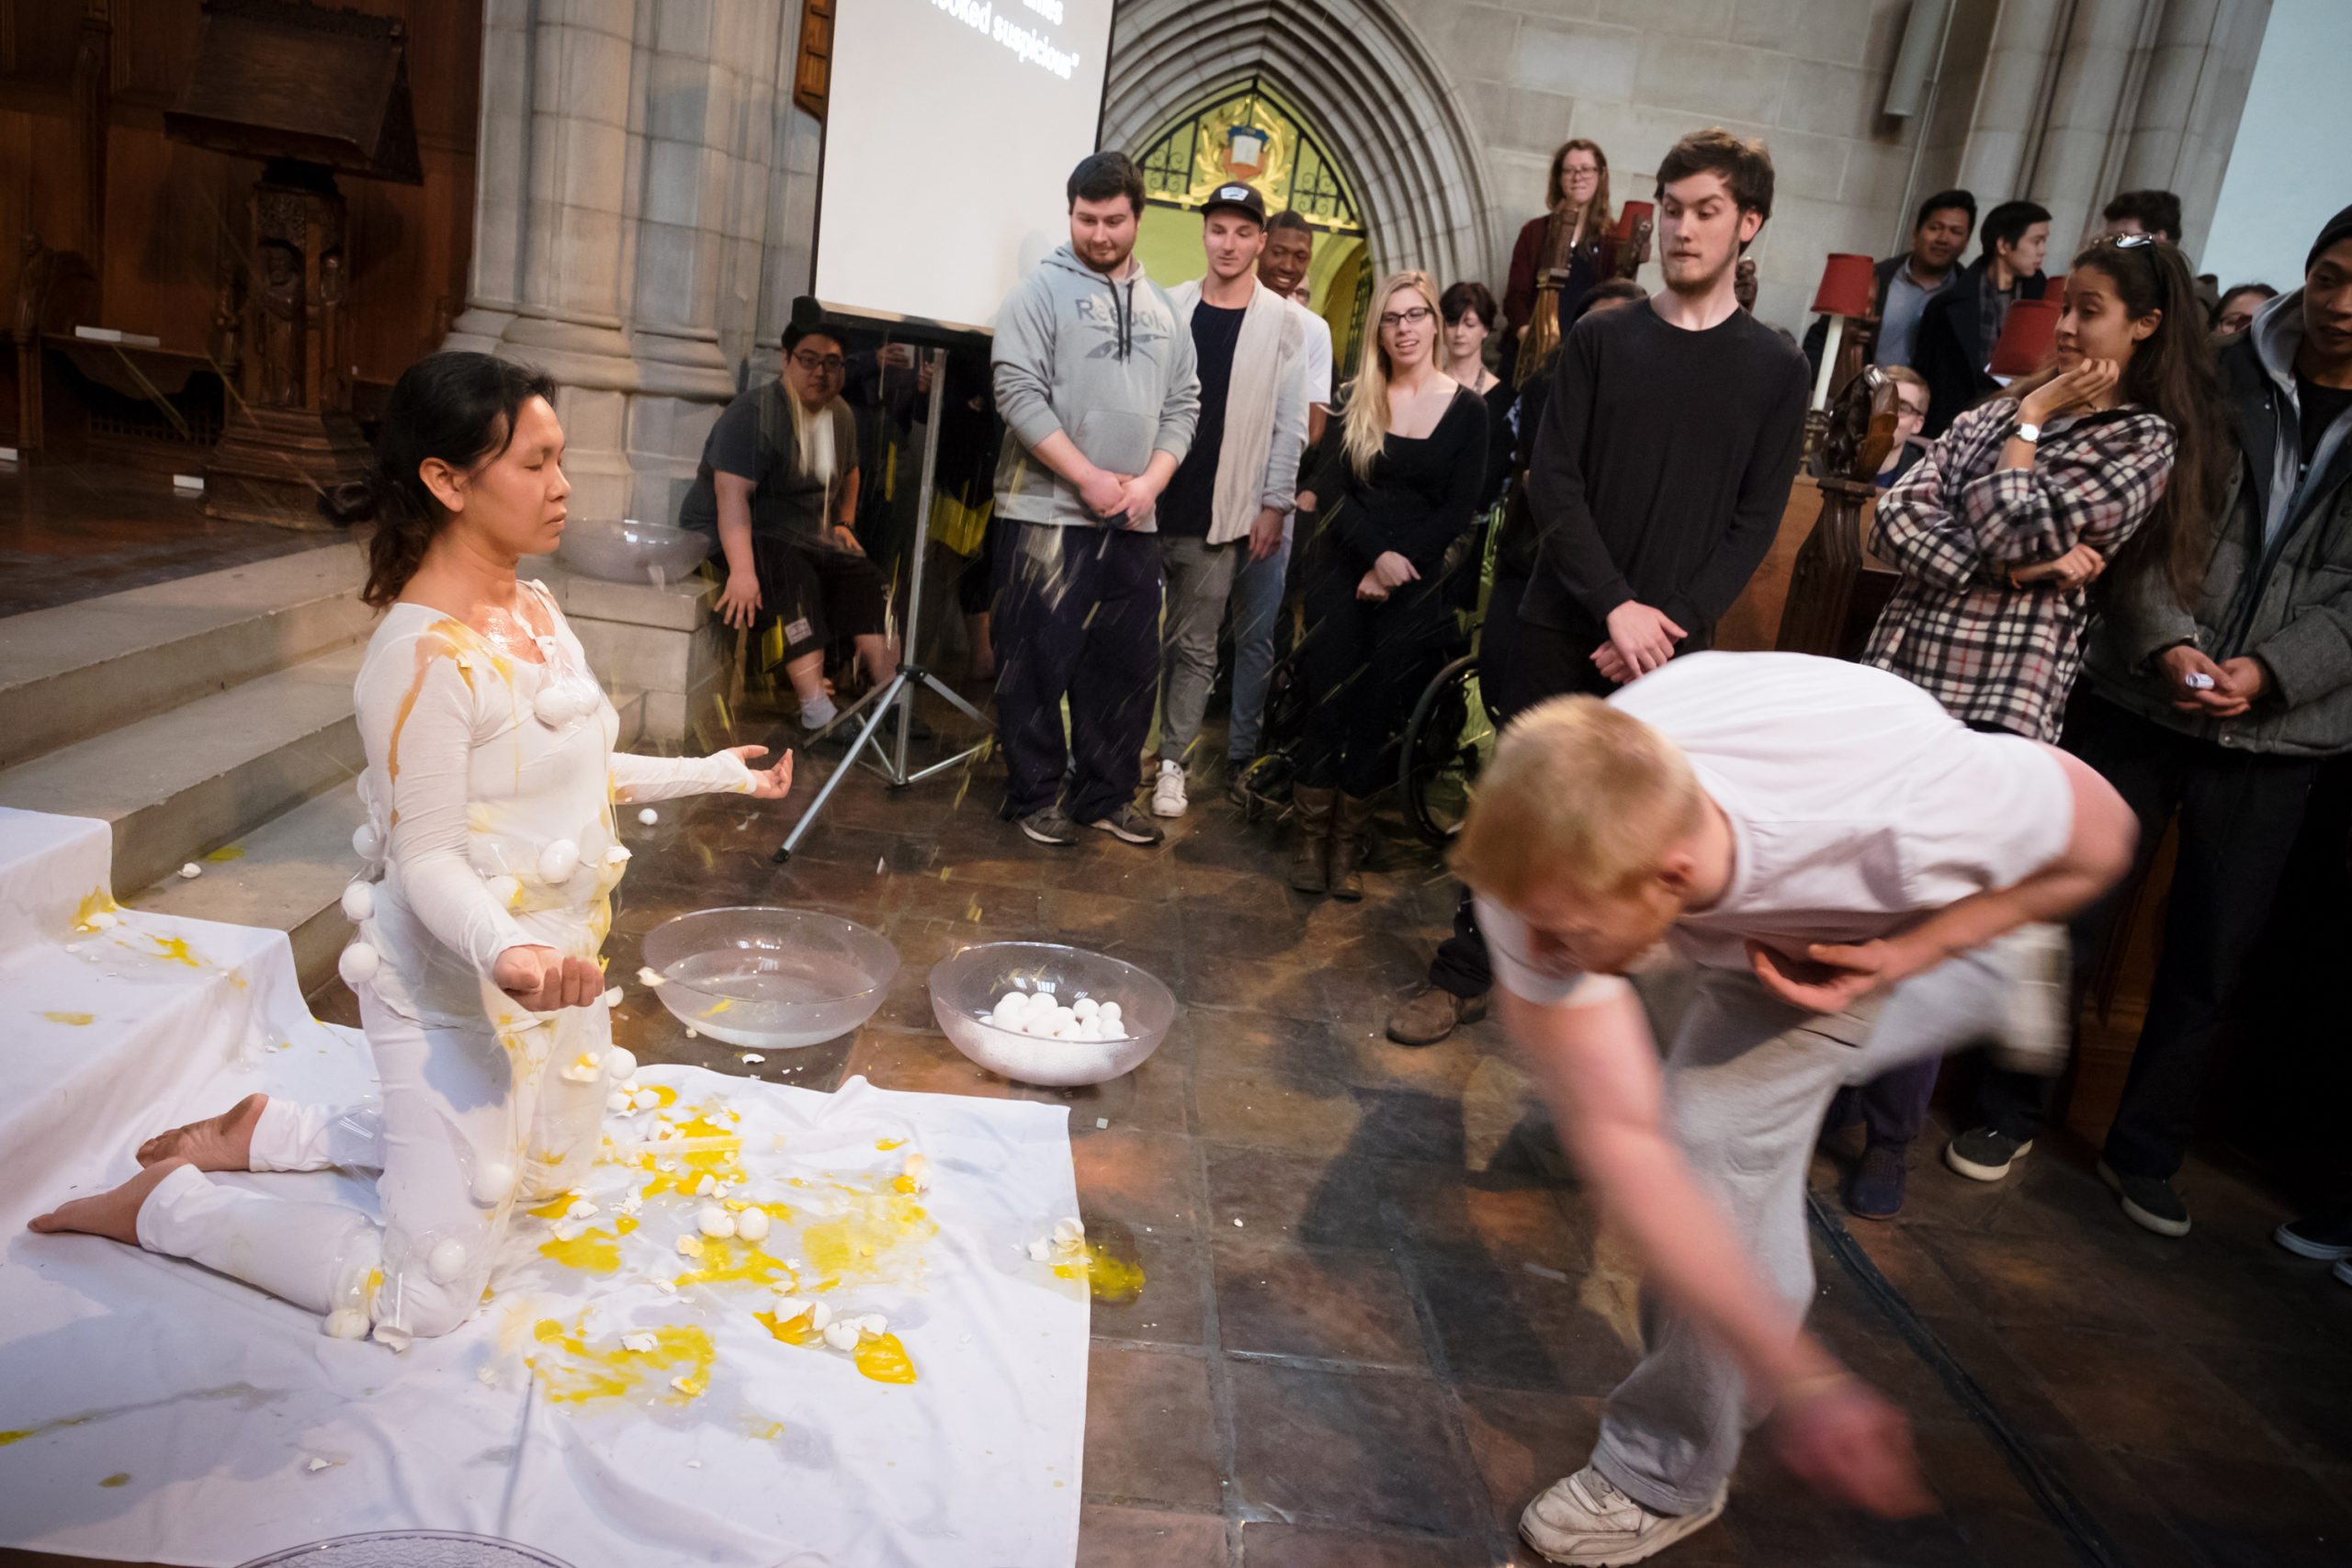 In this action shot inside of Trinty College Chapel, a white male student throws an egg at artist Anida Yoeu Ali as a group of students look on. Anida wears a white bodysuit and is kneeling on a white cloth runner. Her eyes are closed and her arms at her sides with her palms facing up in a meditative surrender. She is covered with broken eggshells and splattered yolks. Two large clear plastic bowls are by her left side - one is filled with water and the other with remaining eggs.